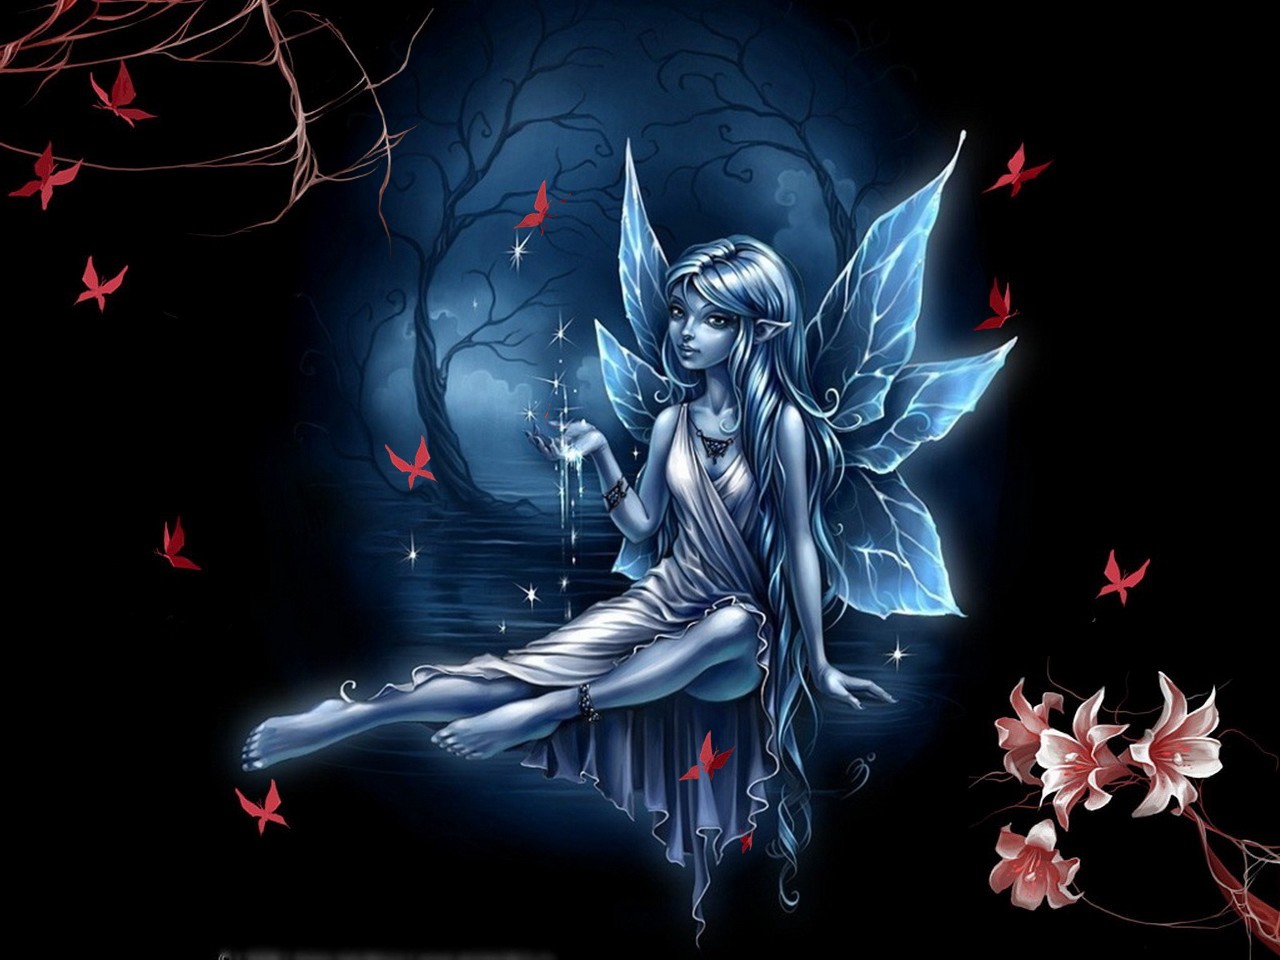 Cool Fairy Image High Definition Desktop Wallpaper To